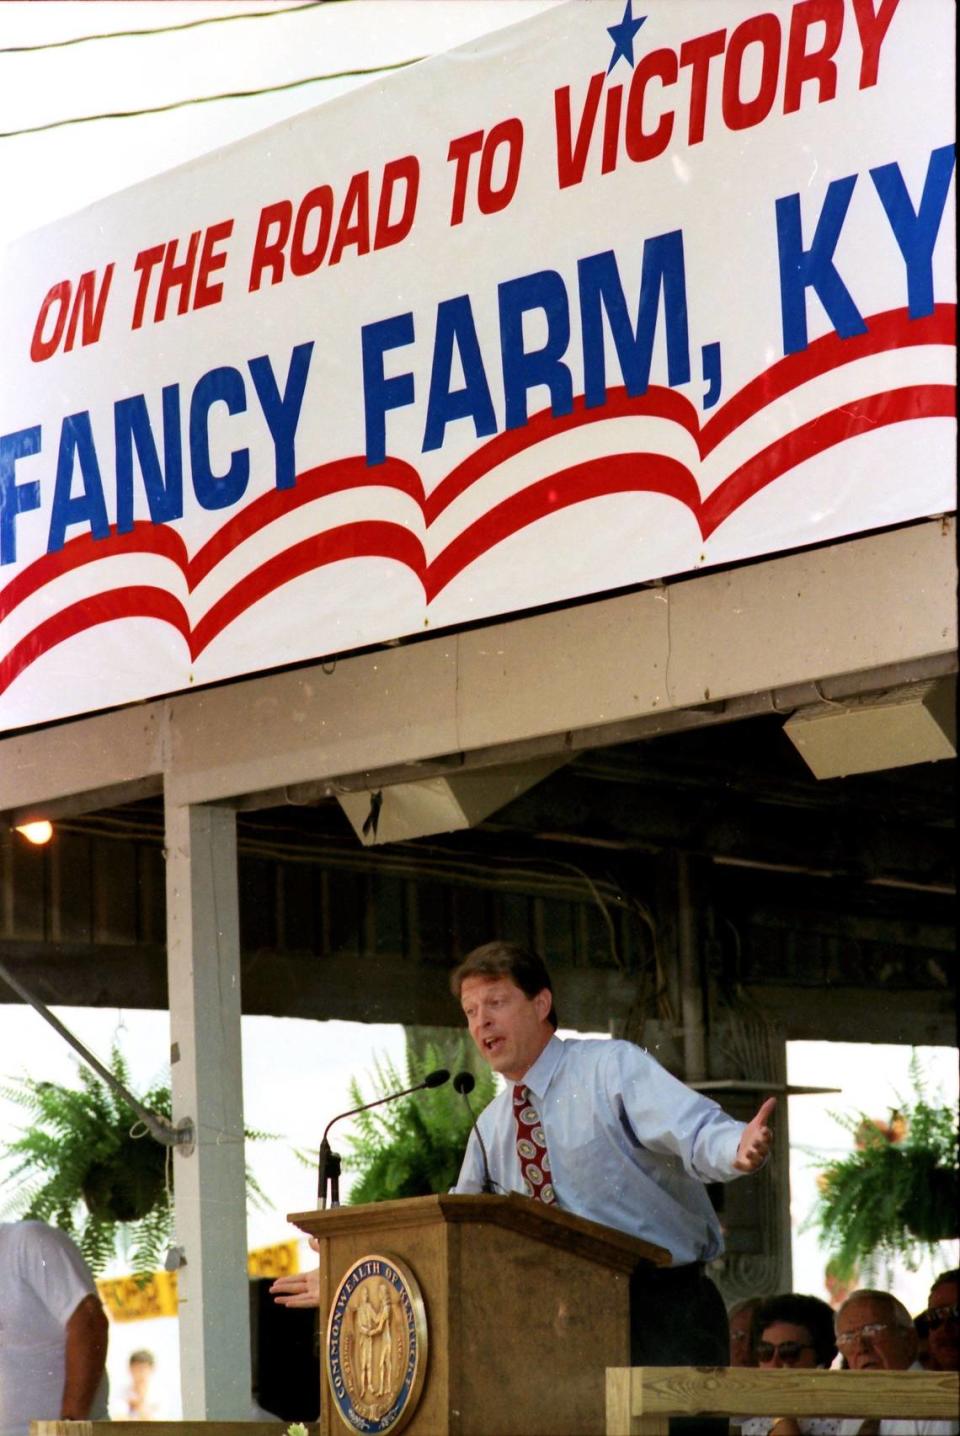 U.S. senator from Tennessee and Democratic vice presidential nominee Al Gore spoke at the annual Fancy Farm political picnic Aug. 1, 1992. Gore arrived by motorcade and made his entrance to the Paul Simon tune “You Can Call Me Al.” He made his way to the stage using double-fisted handshakes with those in the crowd who had pushed their way to the front. The crowd was the largest at a Fancy Farm political picnic in at least the last 10 years. Many of the people, like Judy Chandler of Paducah, came especially to see Gore. Chandler jumped up and down with excitement after Gore hugged her during his exit. “I got to kiss him,” Chandler said. “He’s good looking.” Republican U.S. Sen. Mitch McConnell, who followed Gore to the platform, said that “It’s important to realize that not all change is good change.” Photo by Tim Sharp | staff